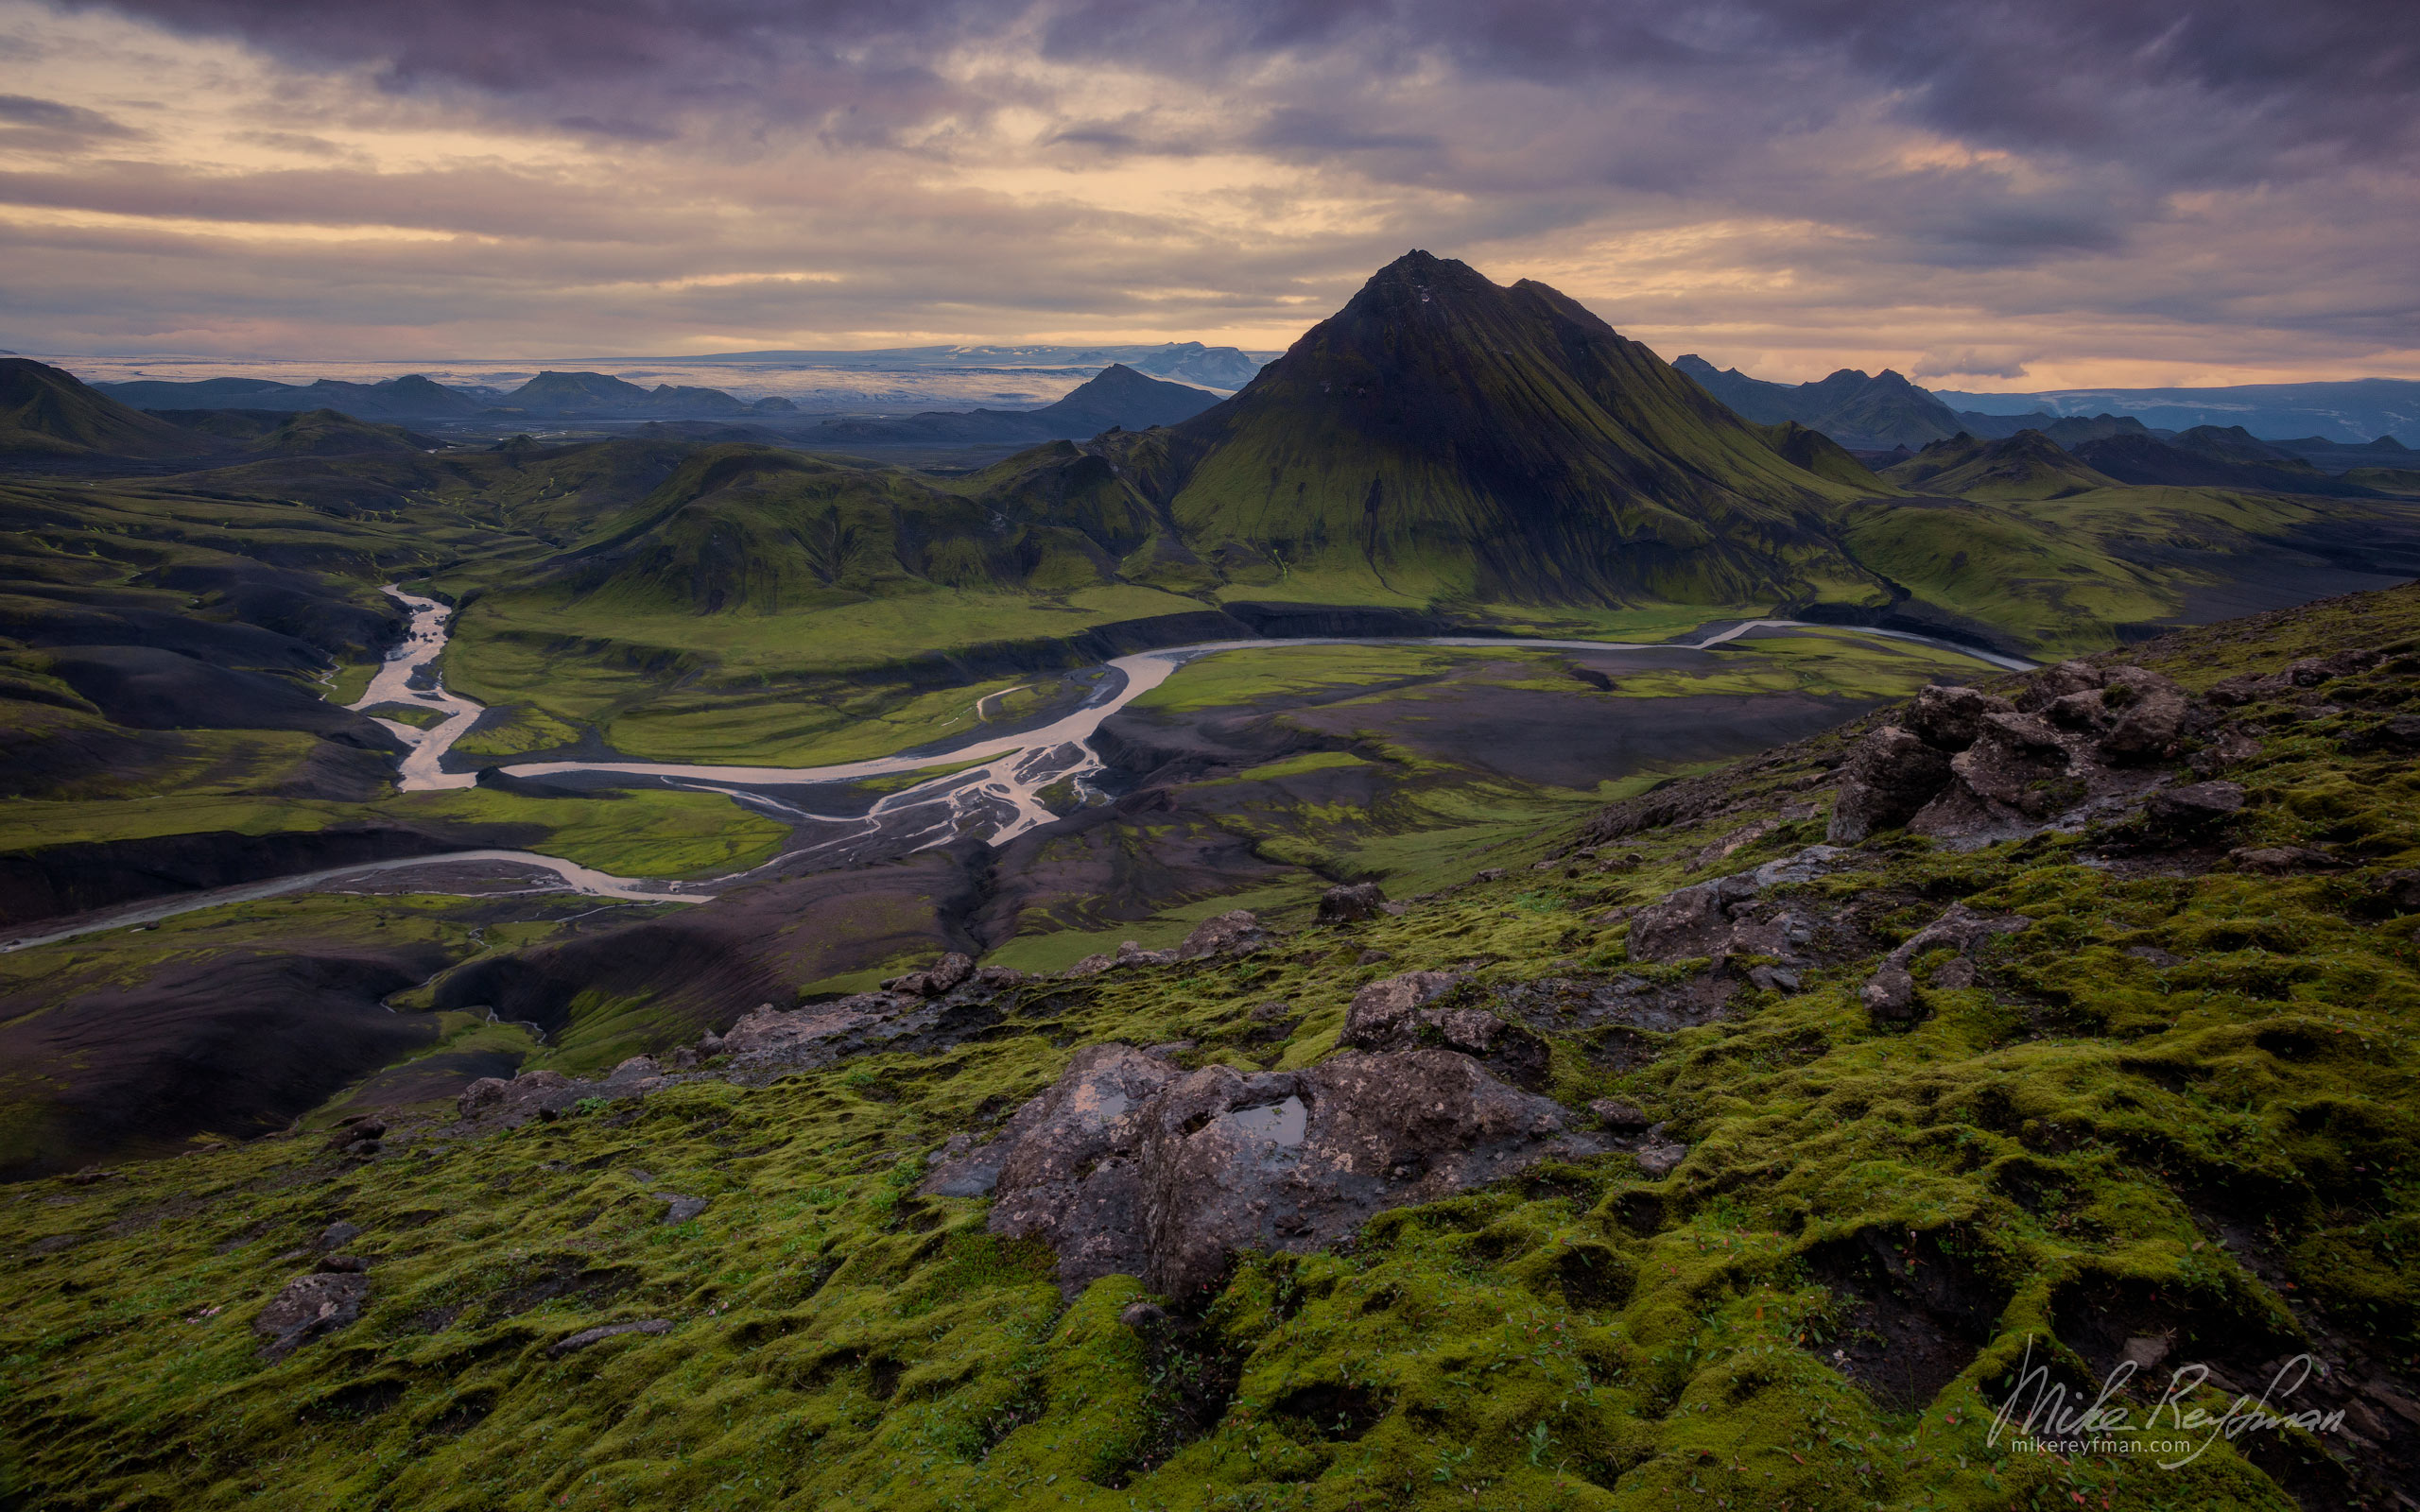 Mount Storasula view from the slope of Mount Bratthals. Southern Fjallabak, Iceland. 131-IC-GP _O3X2968 - Rhyolite Mountains, Crater Lakes, Geothermal Areas, Lava Fields and Glacial Rivers. Iceland.  - Mike Reyfman Photography